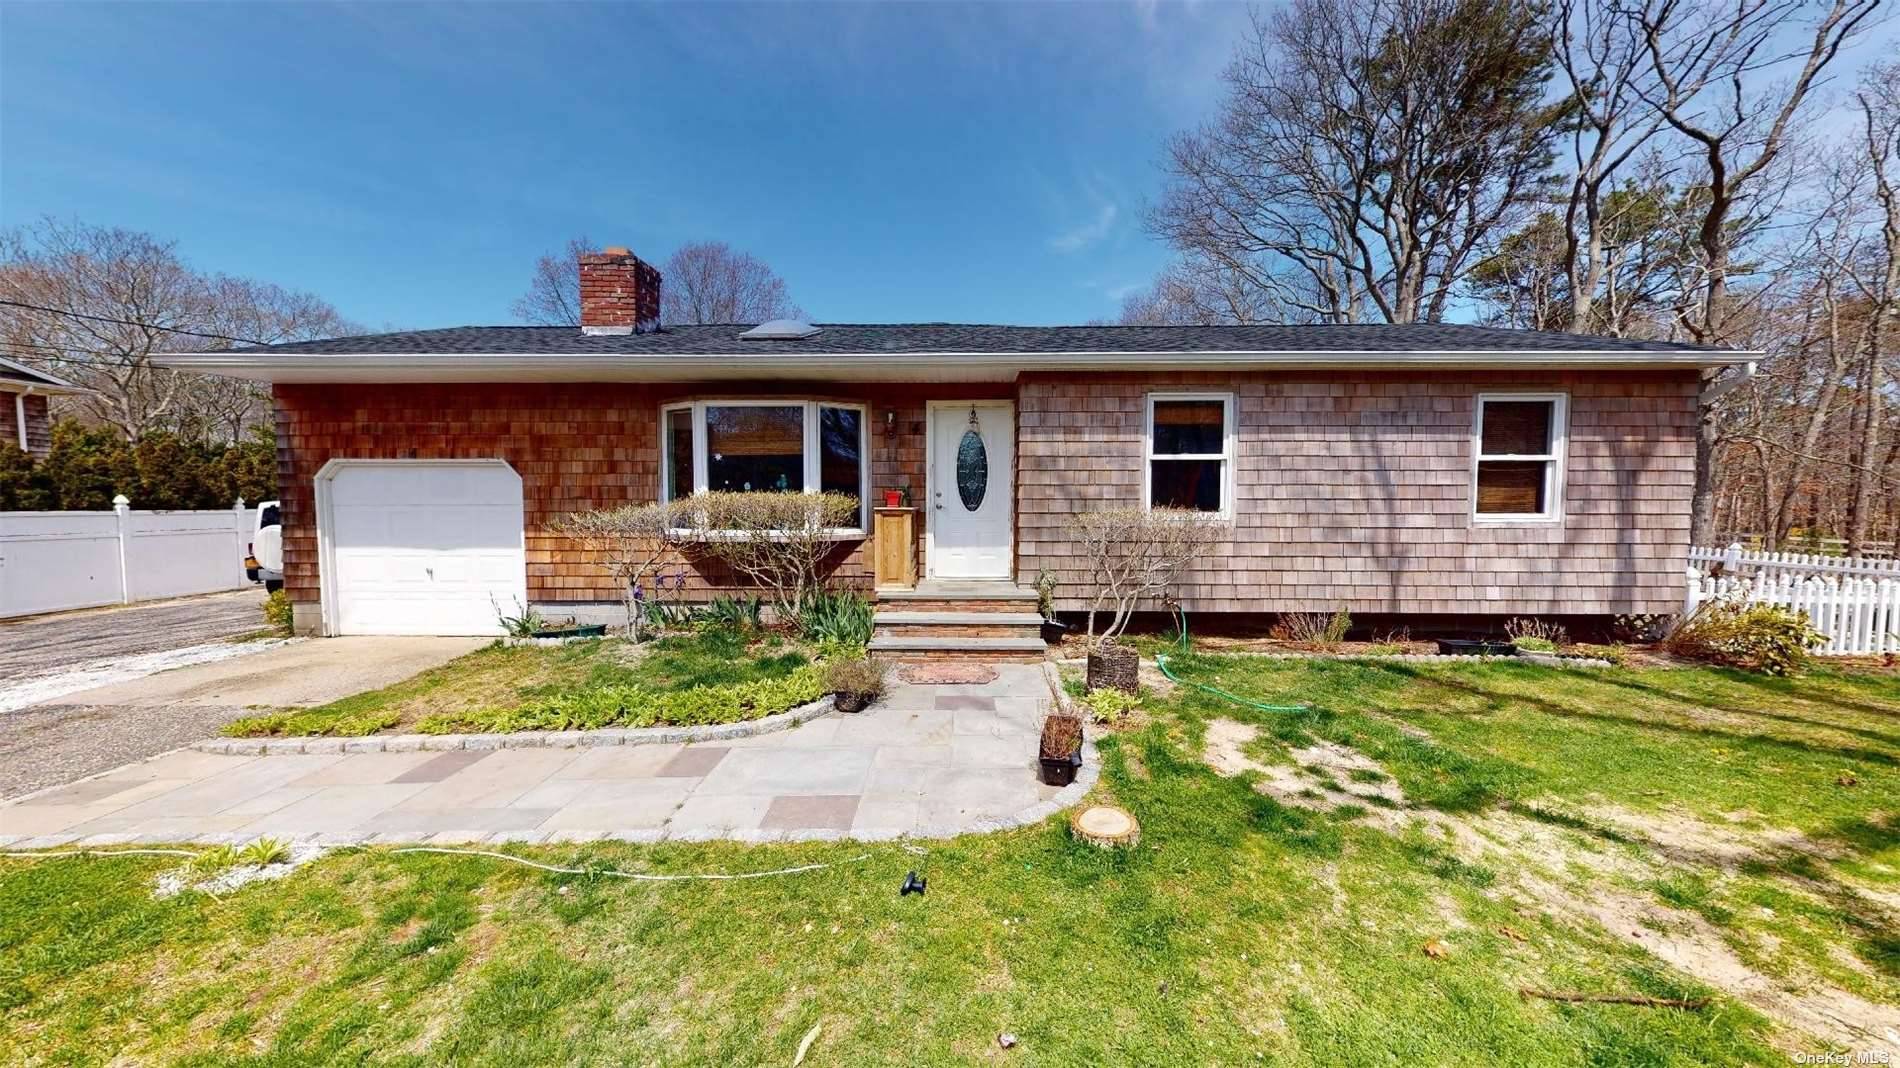 Beautiful ranch house on a large lot in East Quogue with in ground pool.